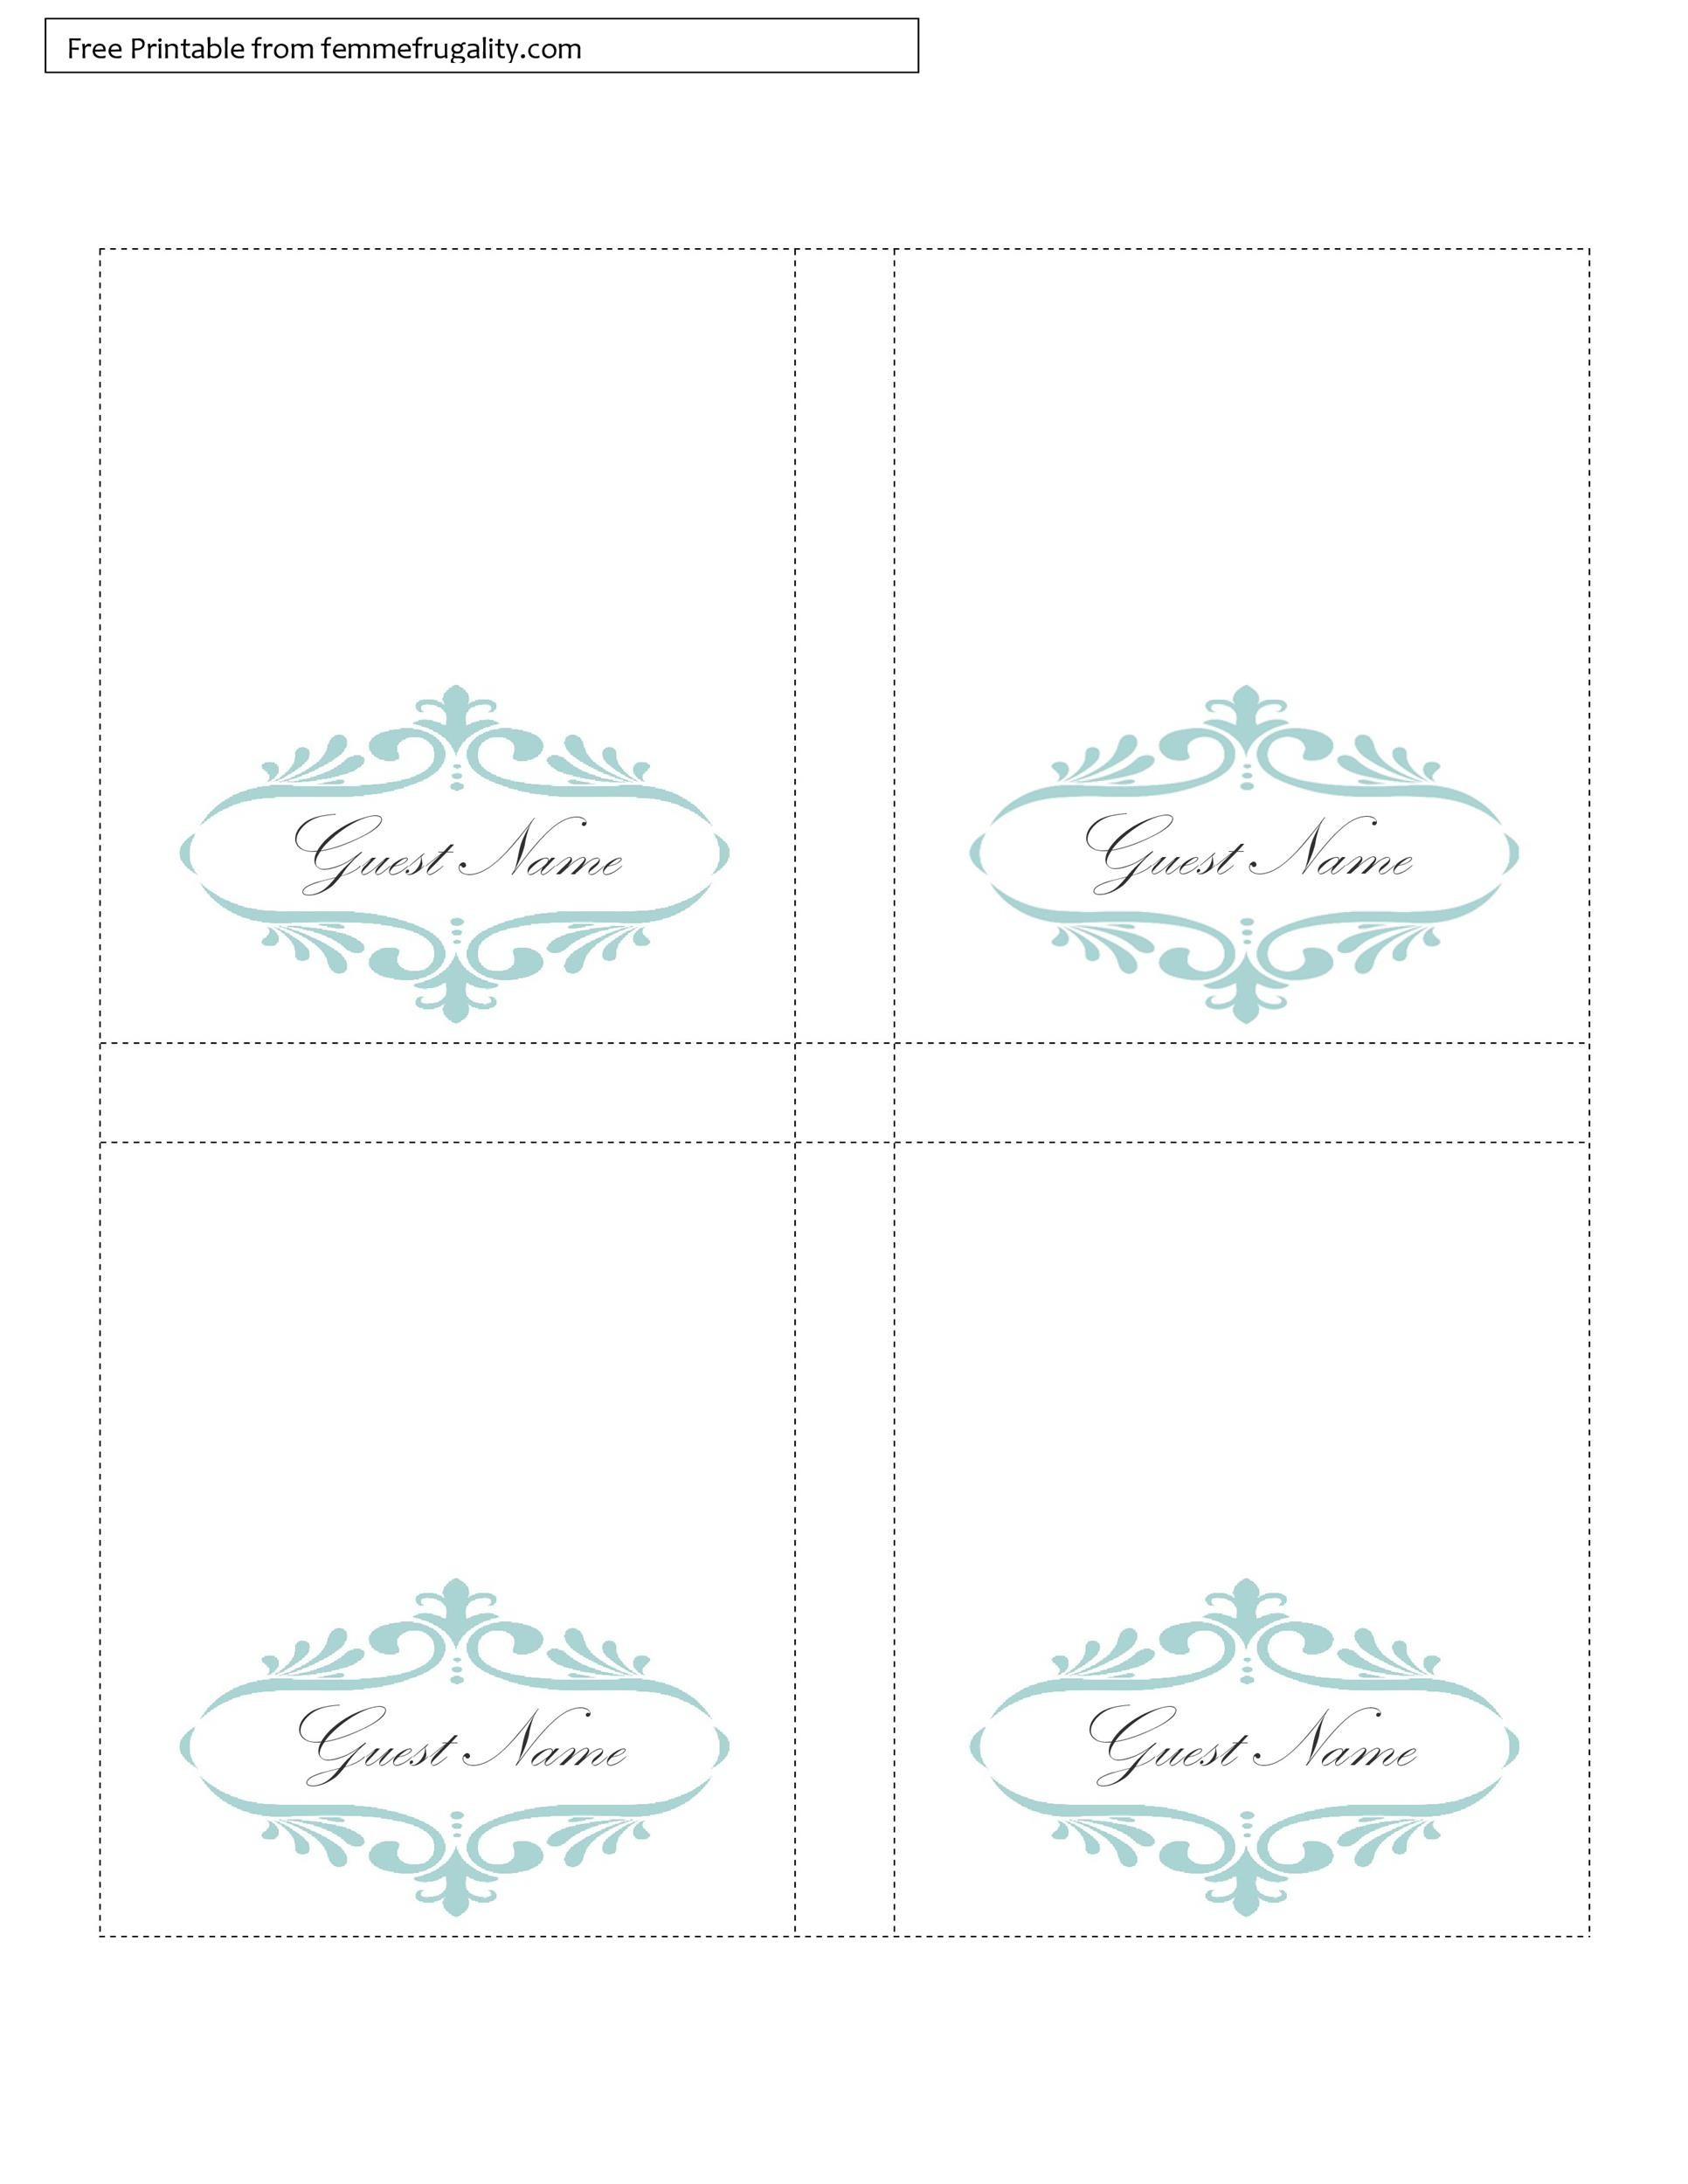 16 Printable Table Tent Templates And Cards ᐅ Templatelab within Free Printable Food Tent Cards